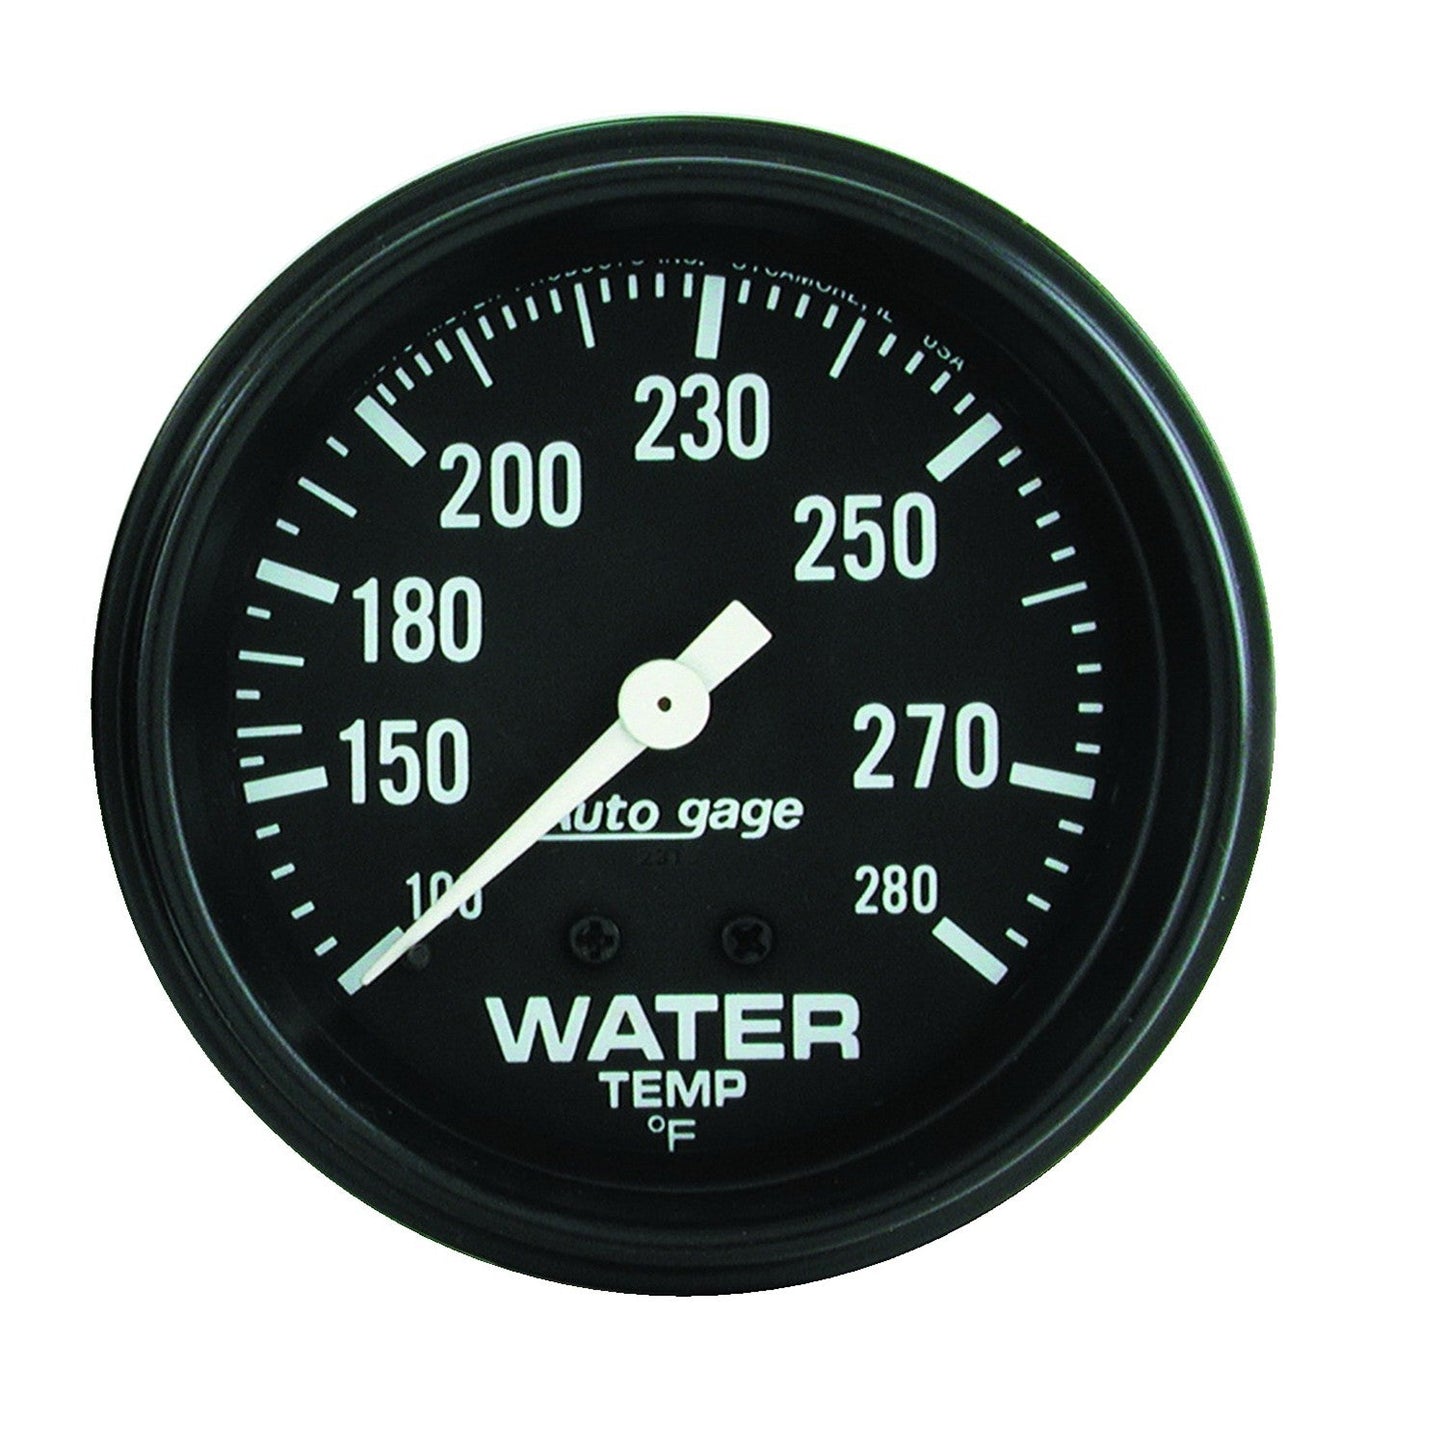 AutoMeter - 2-5/8" WATER TEMPERATURE, 100-280 °F, 6 FT., MECHANICAL, FULL SWEEP, AUTO GAGE (2313)